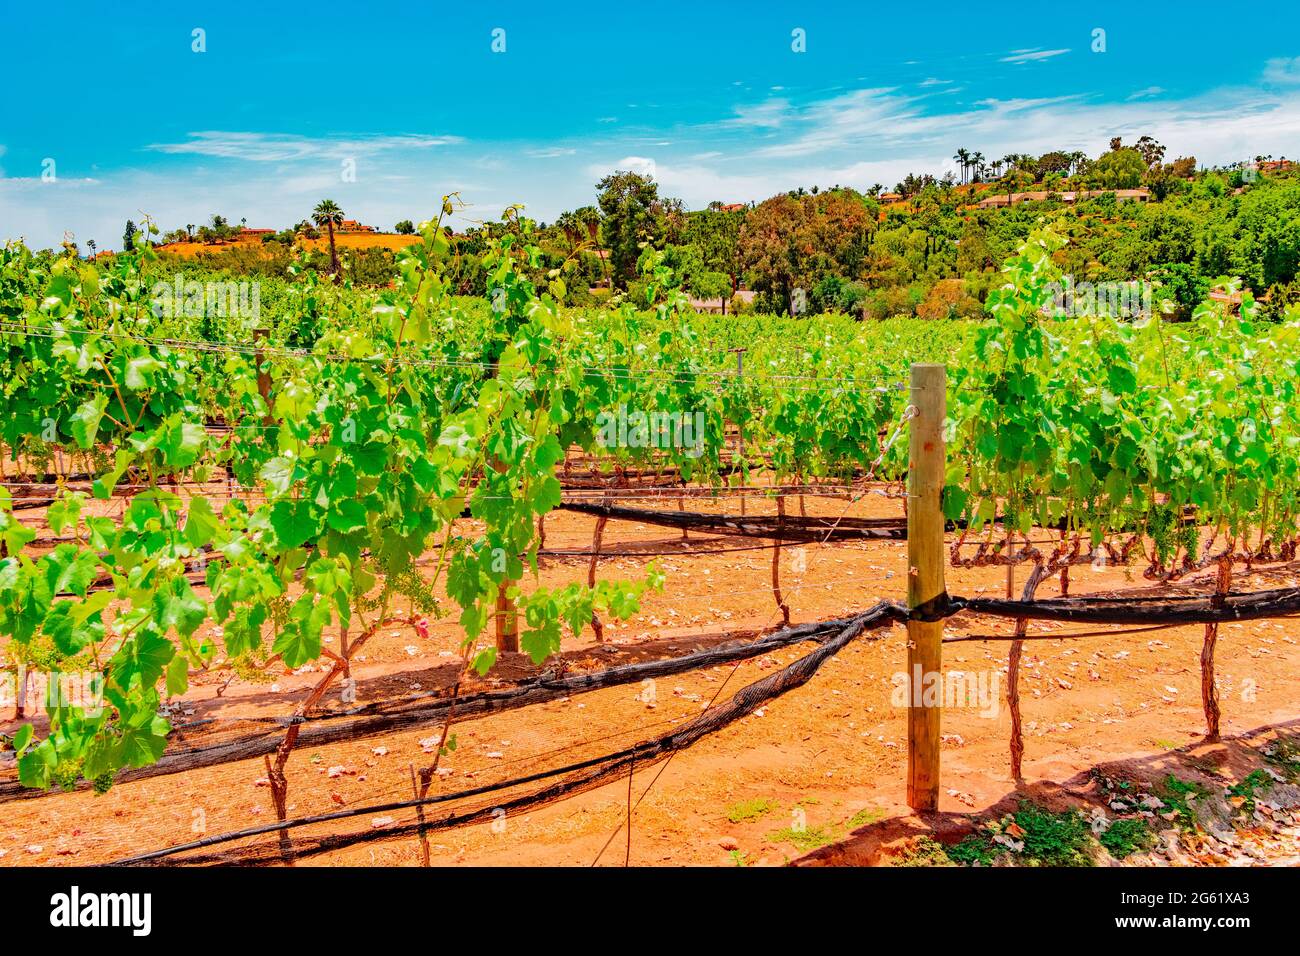 A vineyard stands in front of lush hillsides filled with homes and trees in San Diego County in Southern California. Young grapes are growing on the v Stock Photo